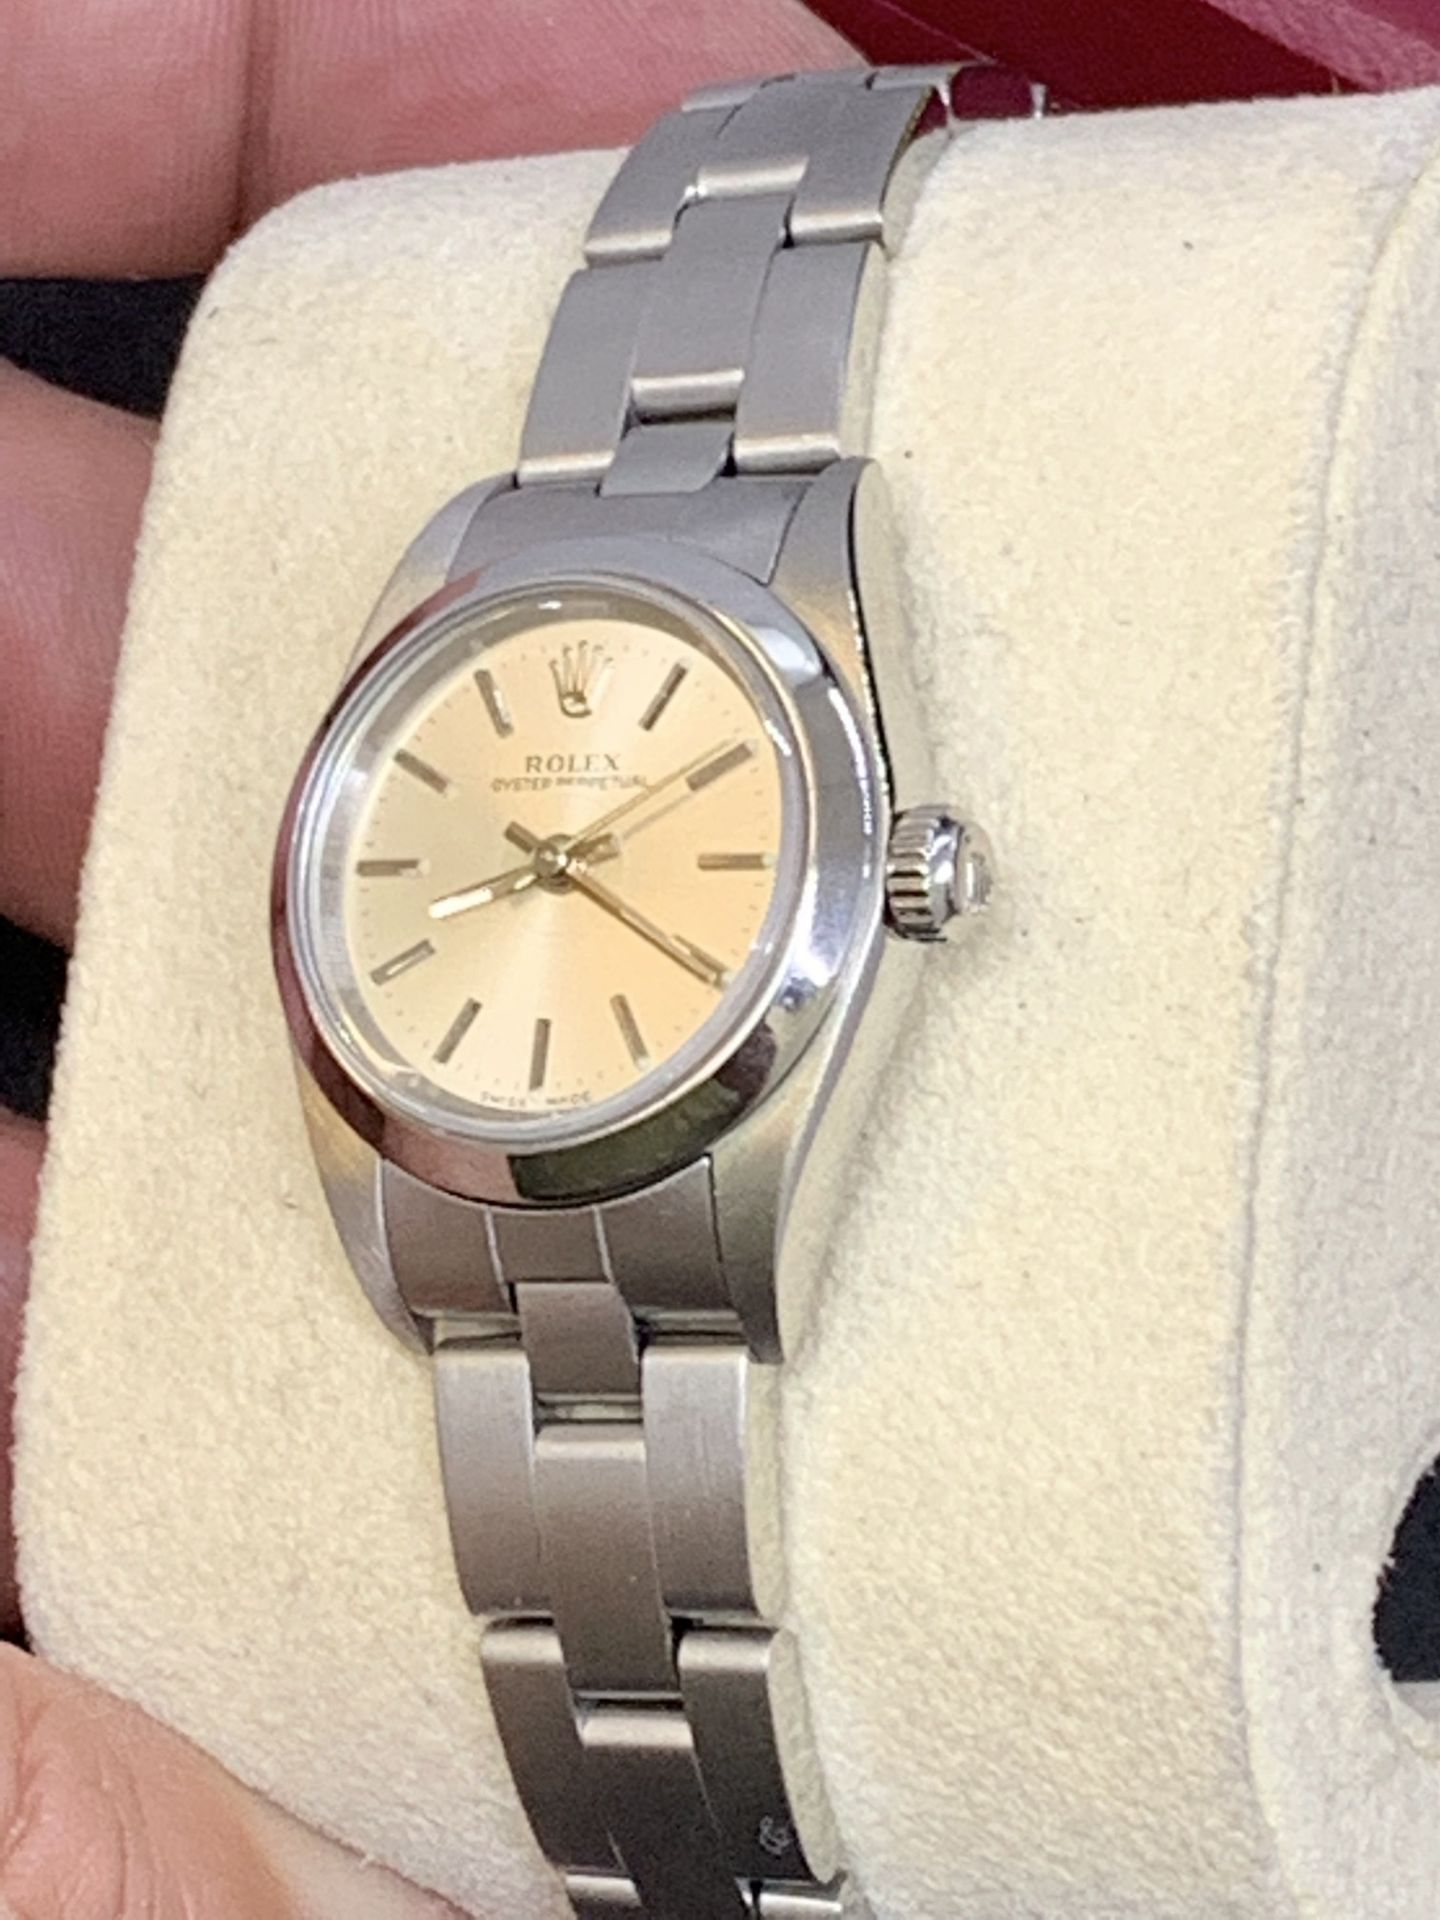 ROLEX STAINLESS STEEL WATCH - Image 10 of 11